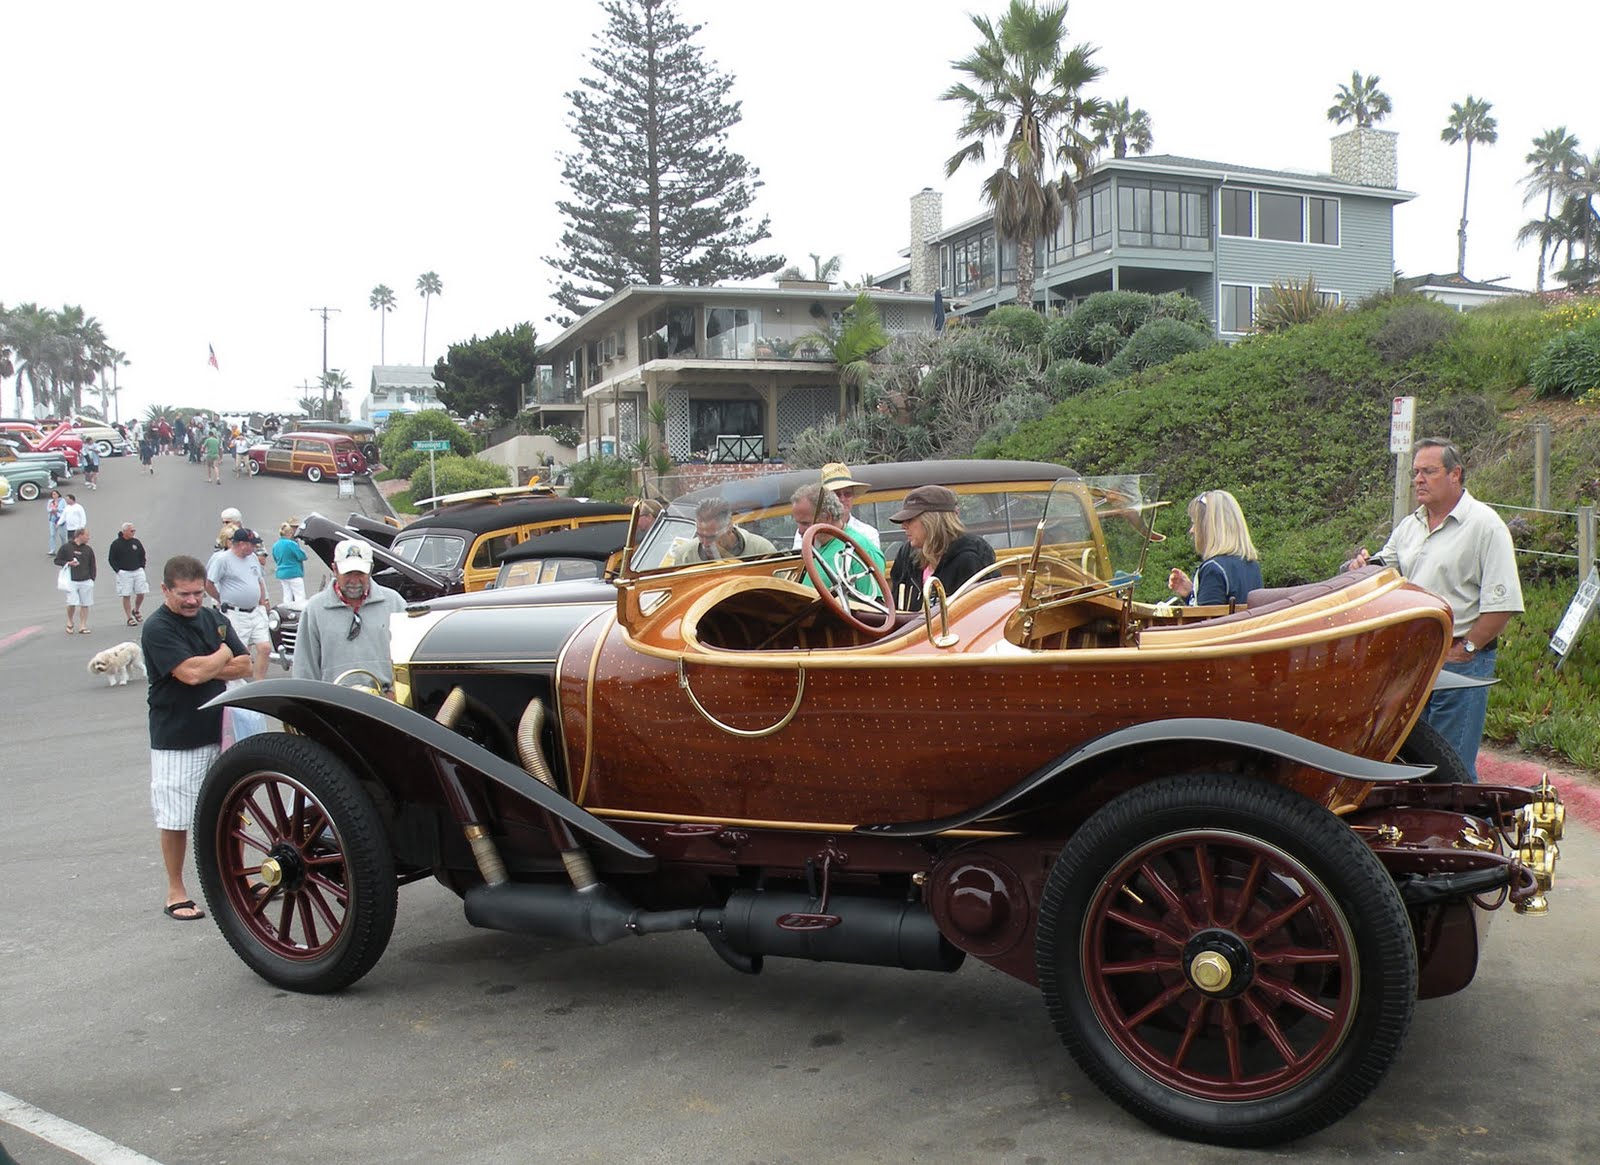 Just A Car Guy 1912 Mercedes model 37 with perfect wood coachwork by Henri Labourdette, was at Wavecrest and was a crowd magnet